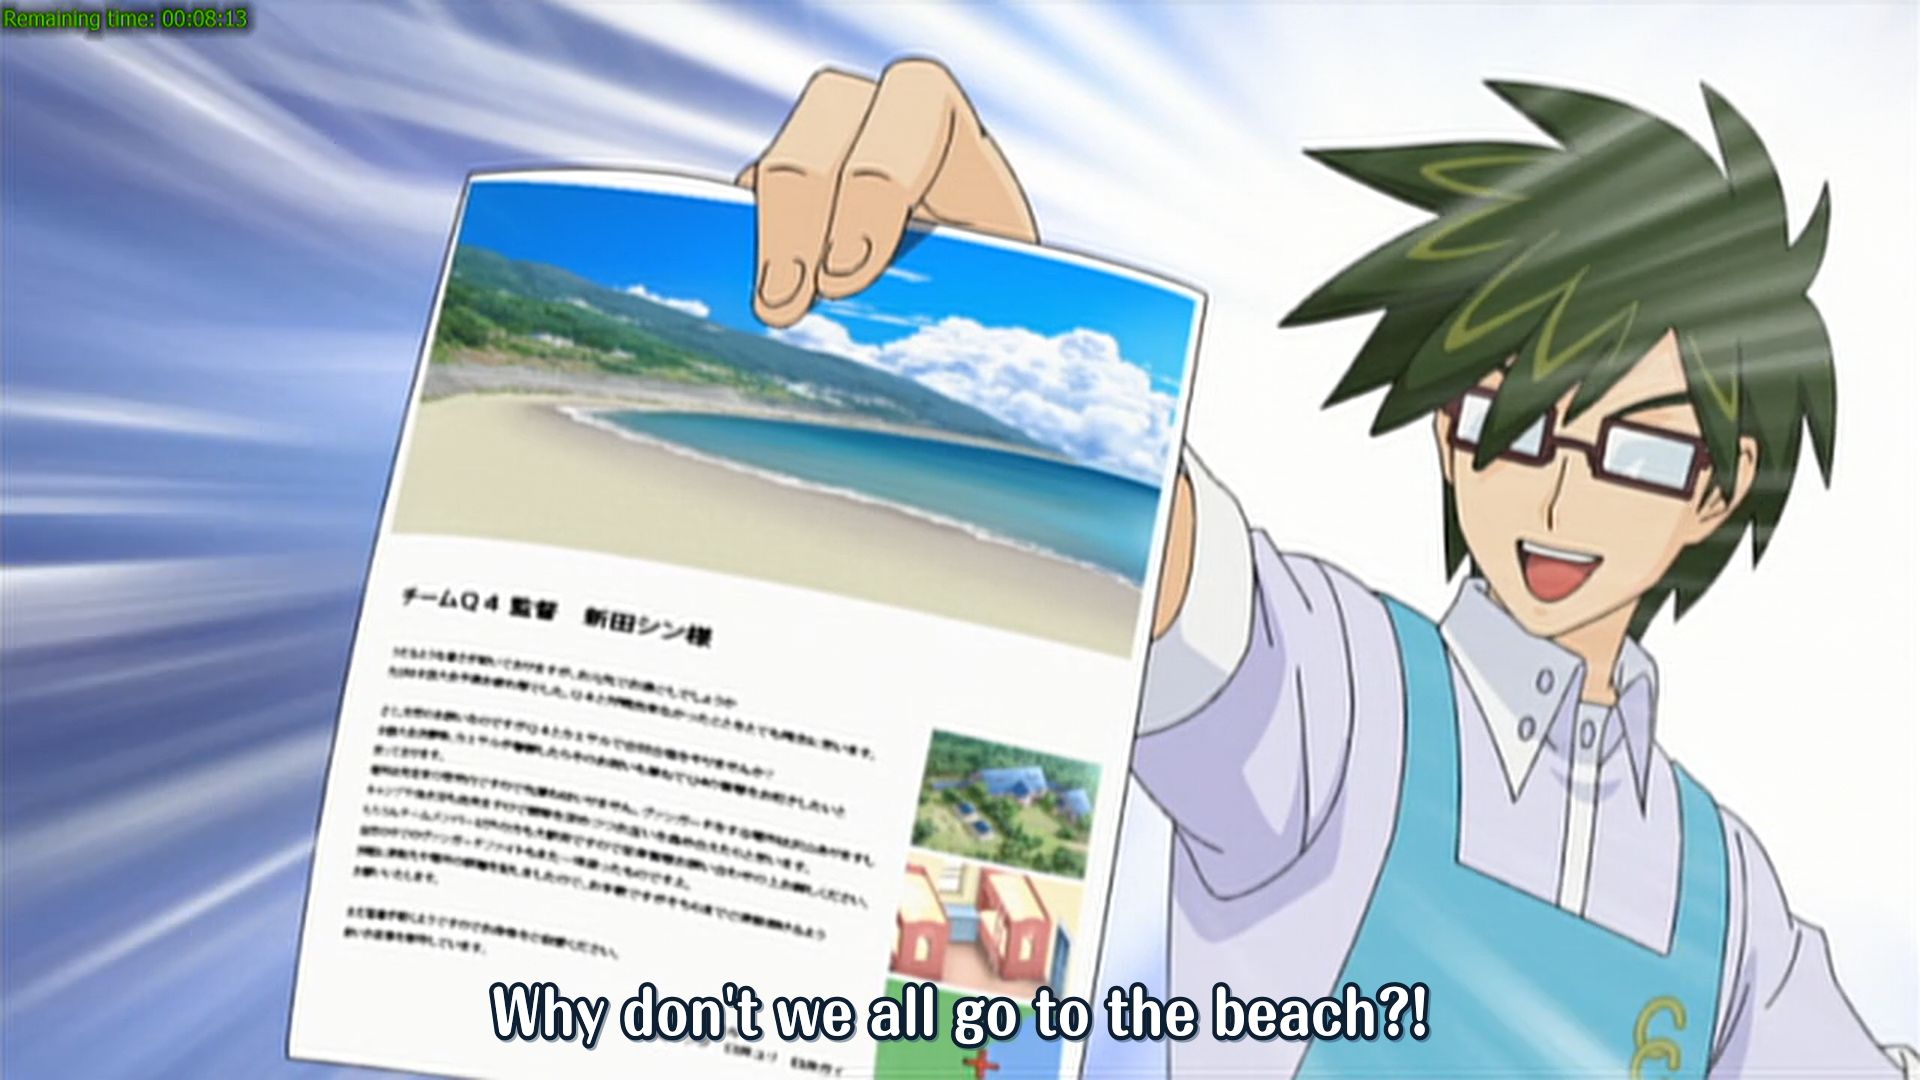 This series has a beach episode too. I wonder if it can be mentioned in the same breath as the Highschool of the Dead OVA is.